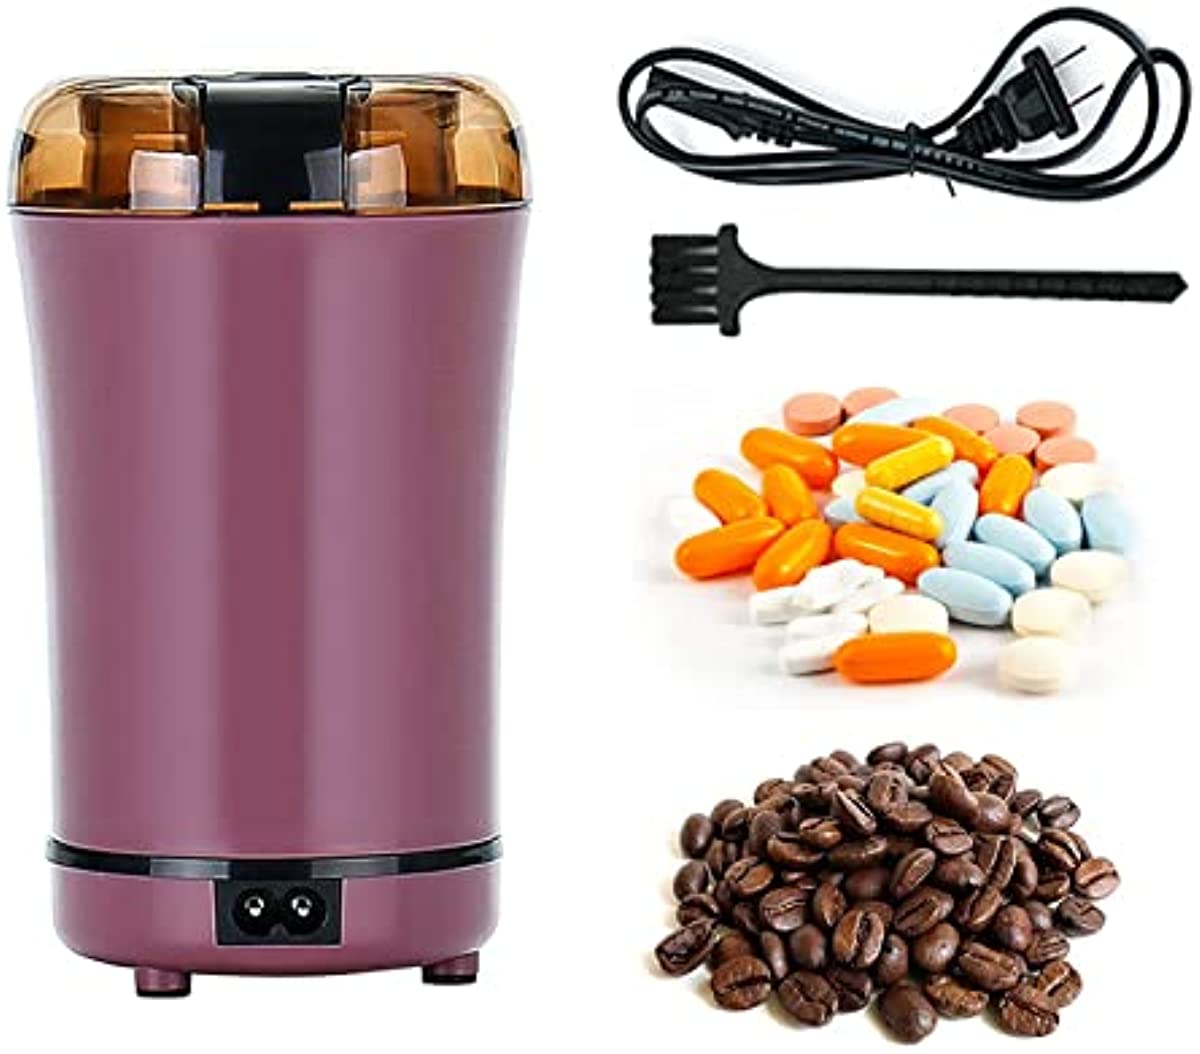 Electric Multifunctional Grinder.Electric Pill Crusher Grinder for Small or Large Pills,to Fine Powder. Pill Crusher Pulverizer Grinder for Elders or Pets. Small Dose Coffee Bean Grinder. (Purple)